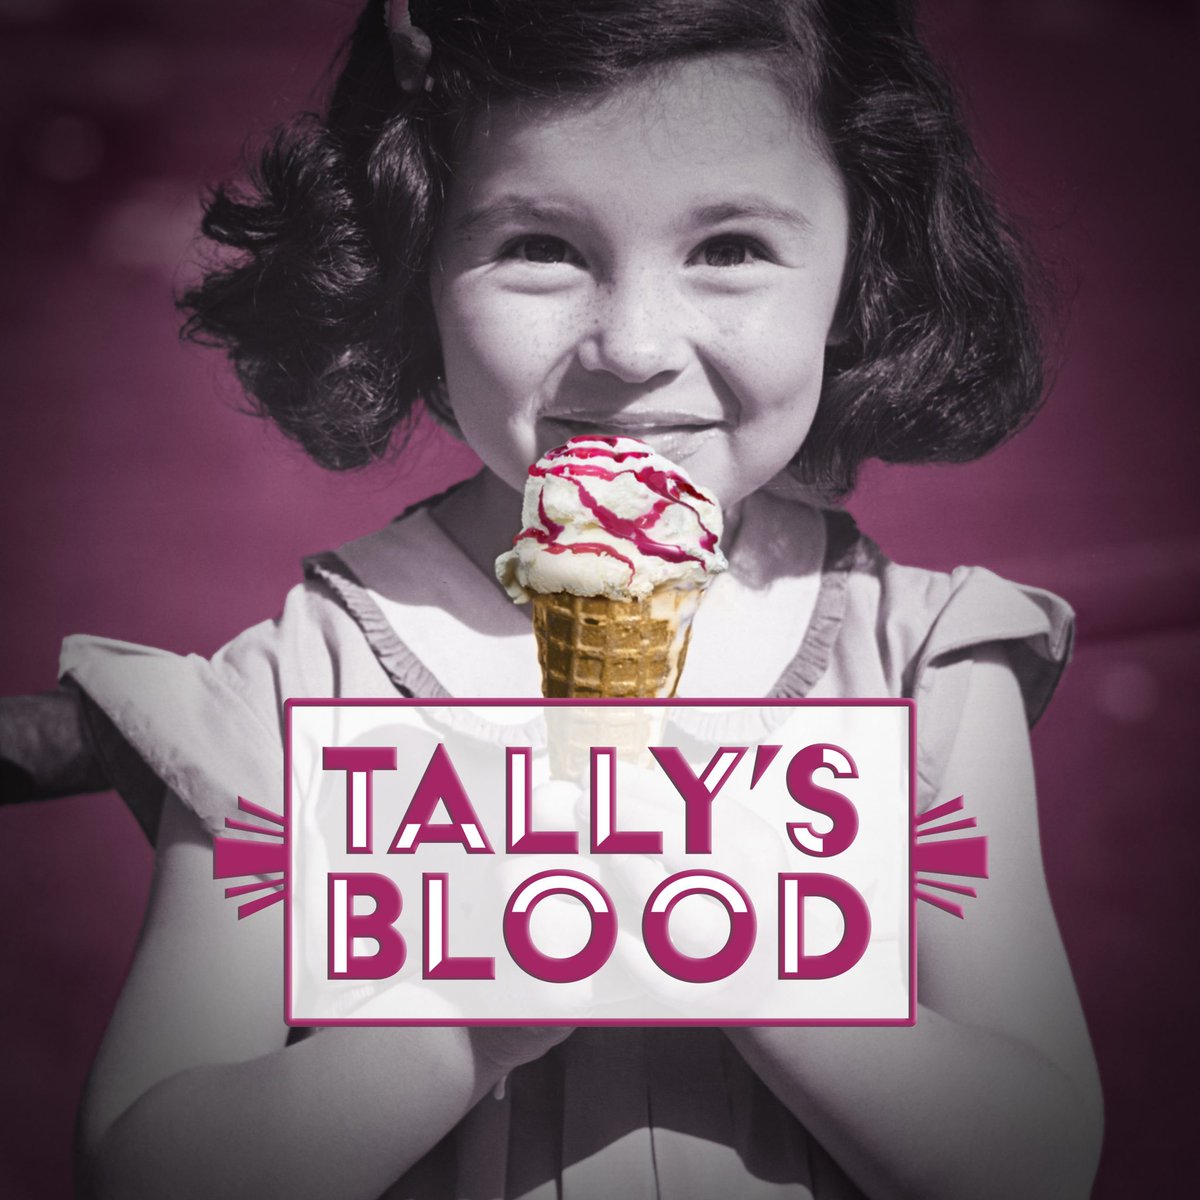 🎙️ BIG NEWS! 🎙️ We are so excited to announce @ReadingCafePod LIVE for S3-6 @holycrossham pupils at 7pm on Thursday, 7th March. Our very special guest will be Ann Marie Di Mambro, writer of the National 5 English set text, Tally’s Blood. Look out for the episode next month!